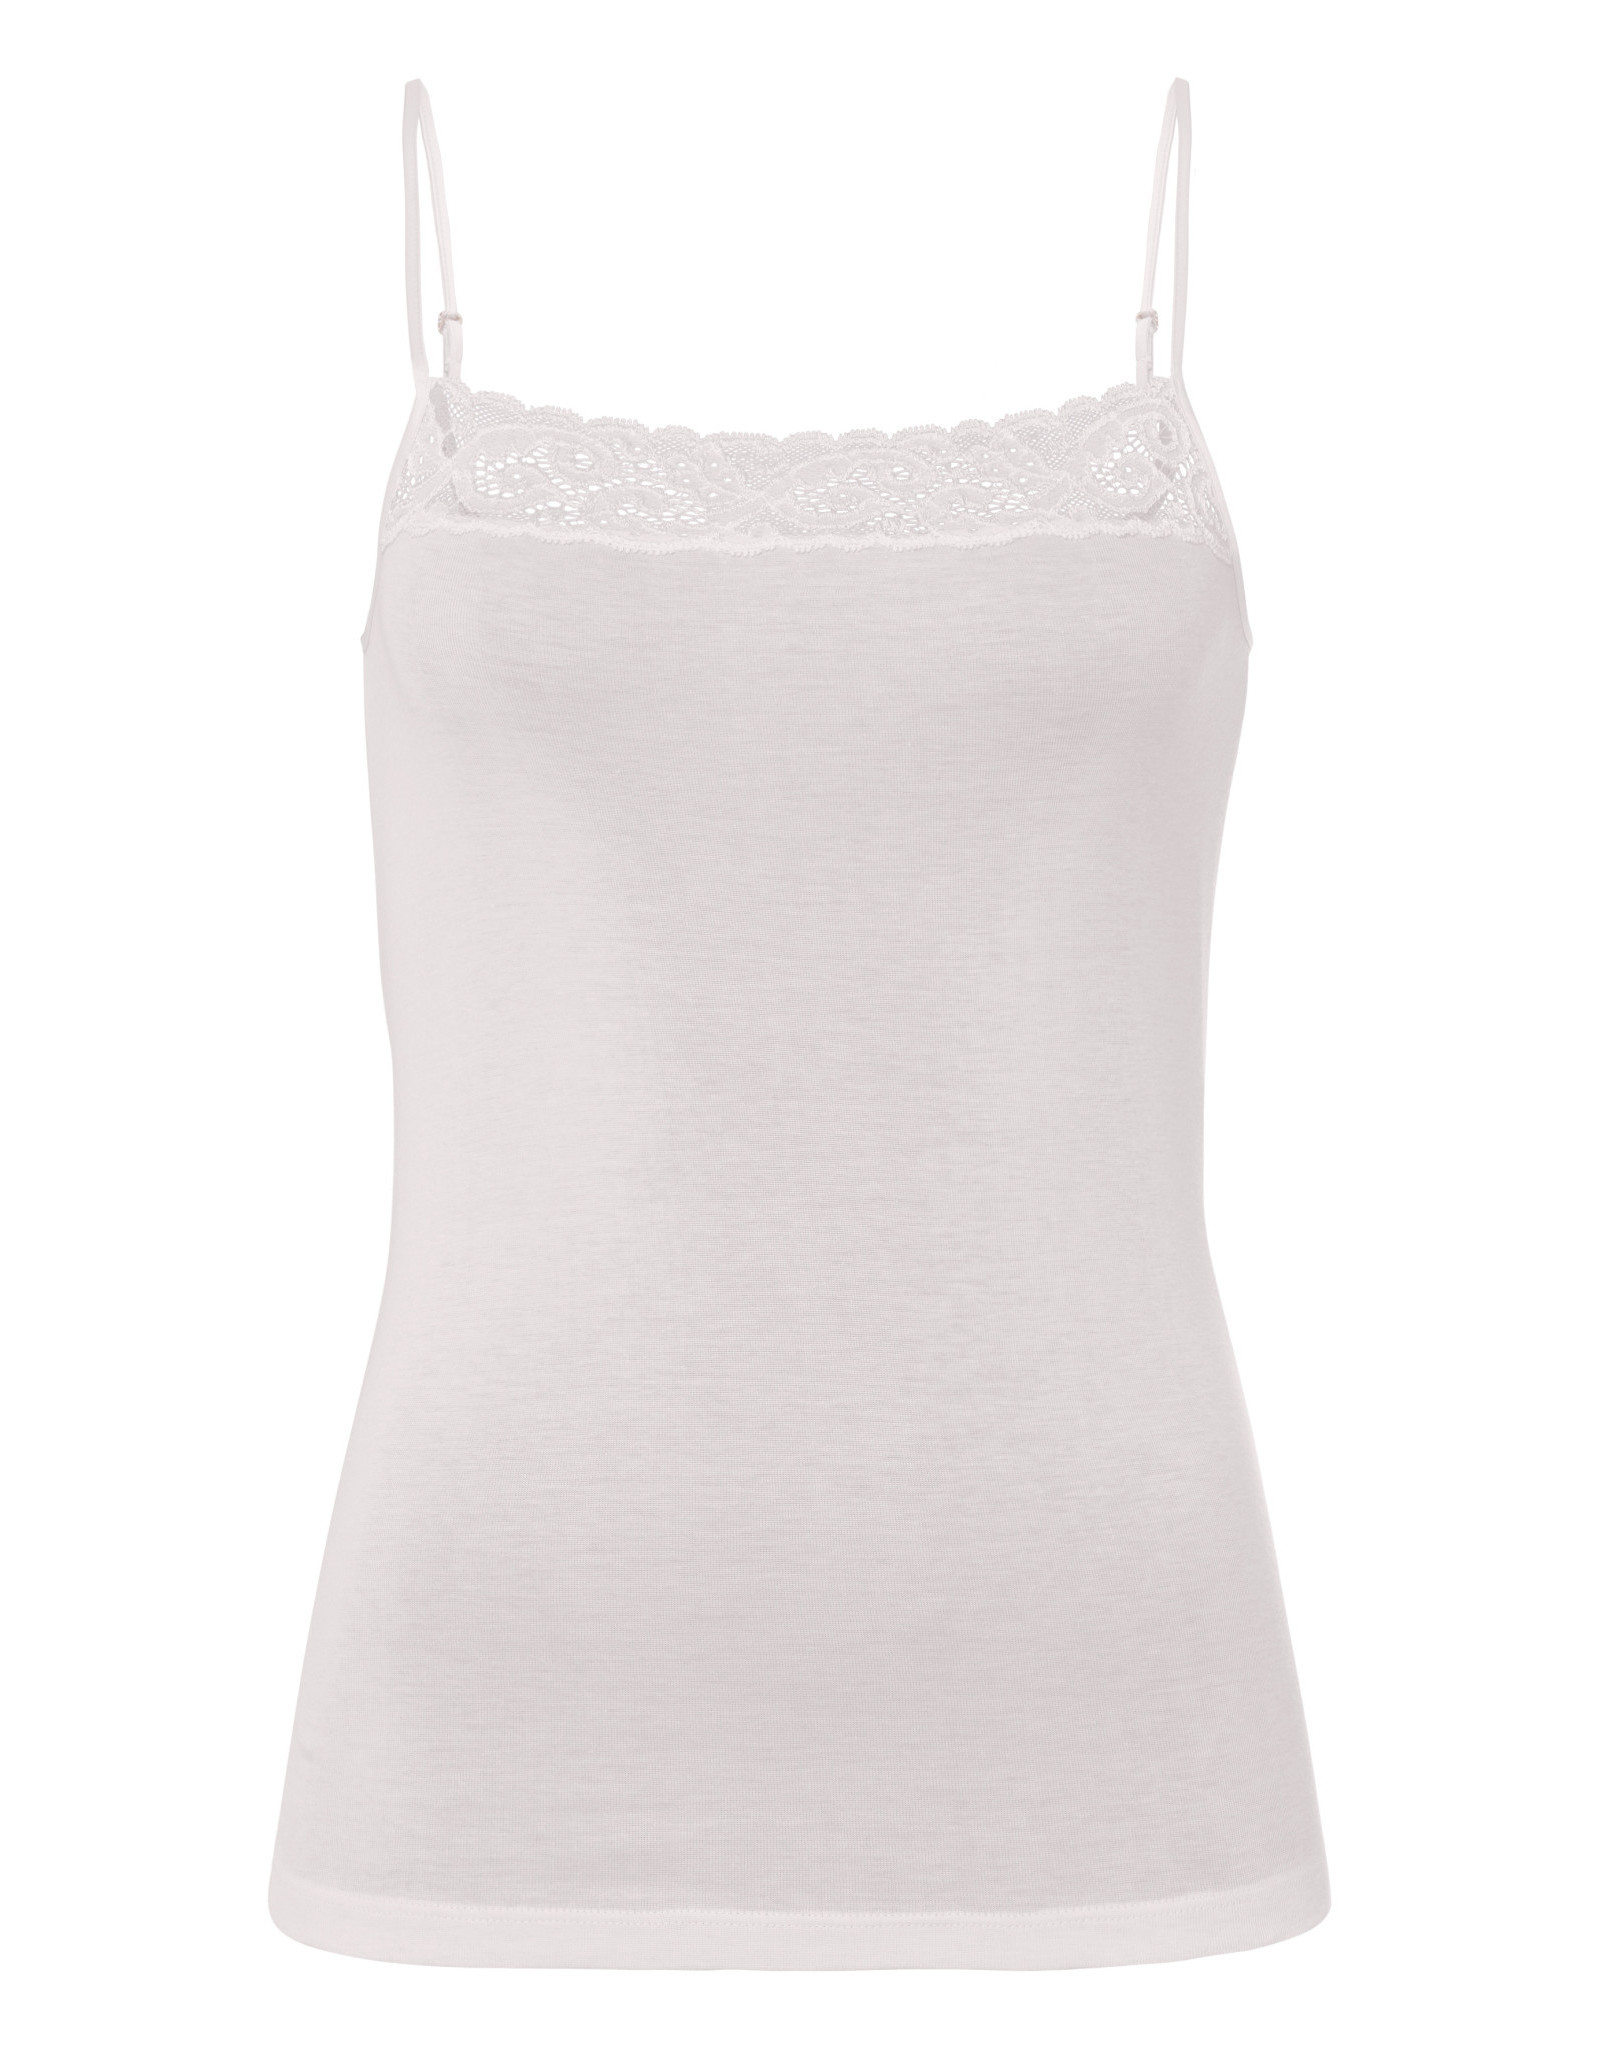 Hanro Moments Straight Across Lace Camisole